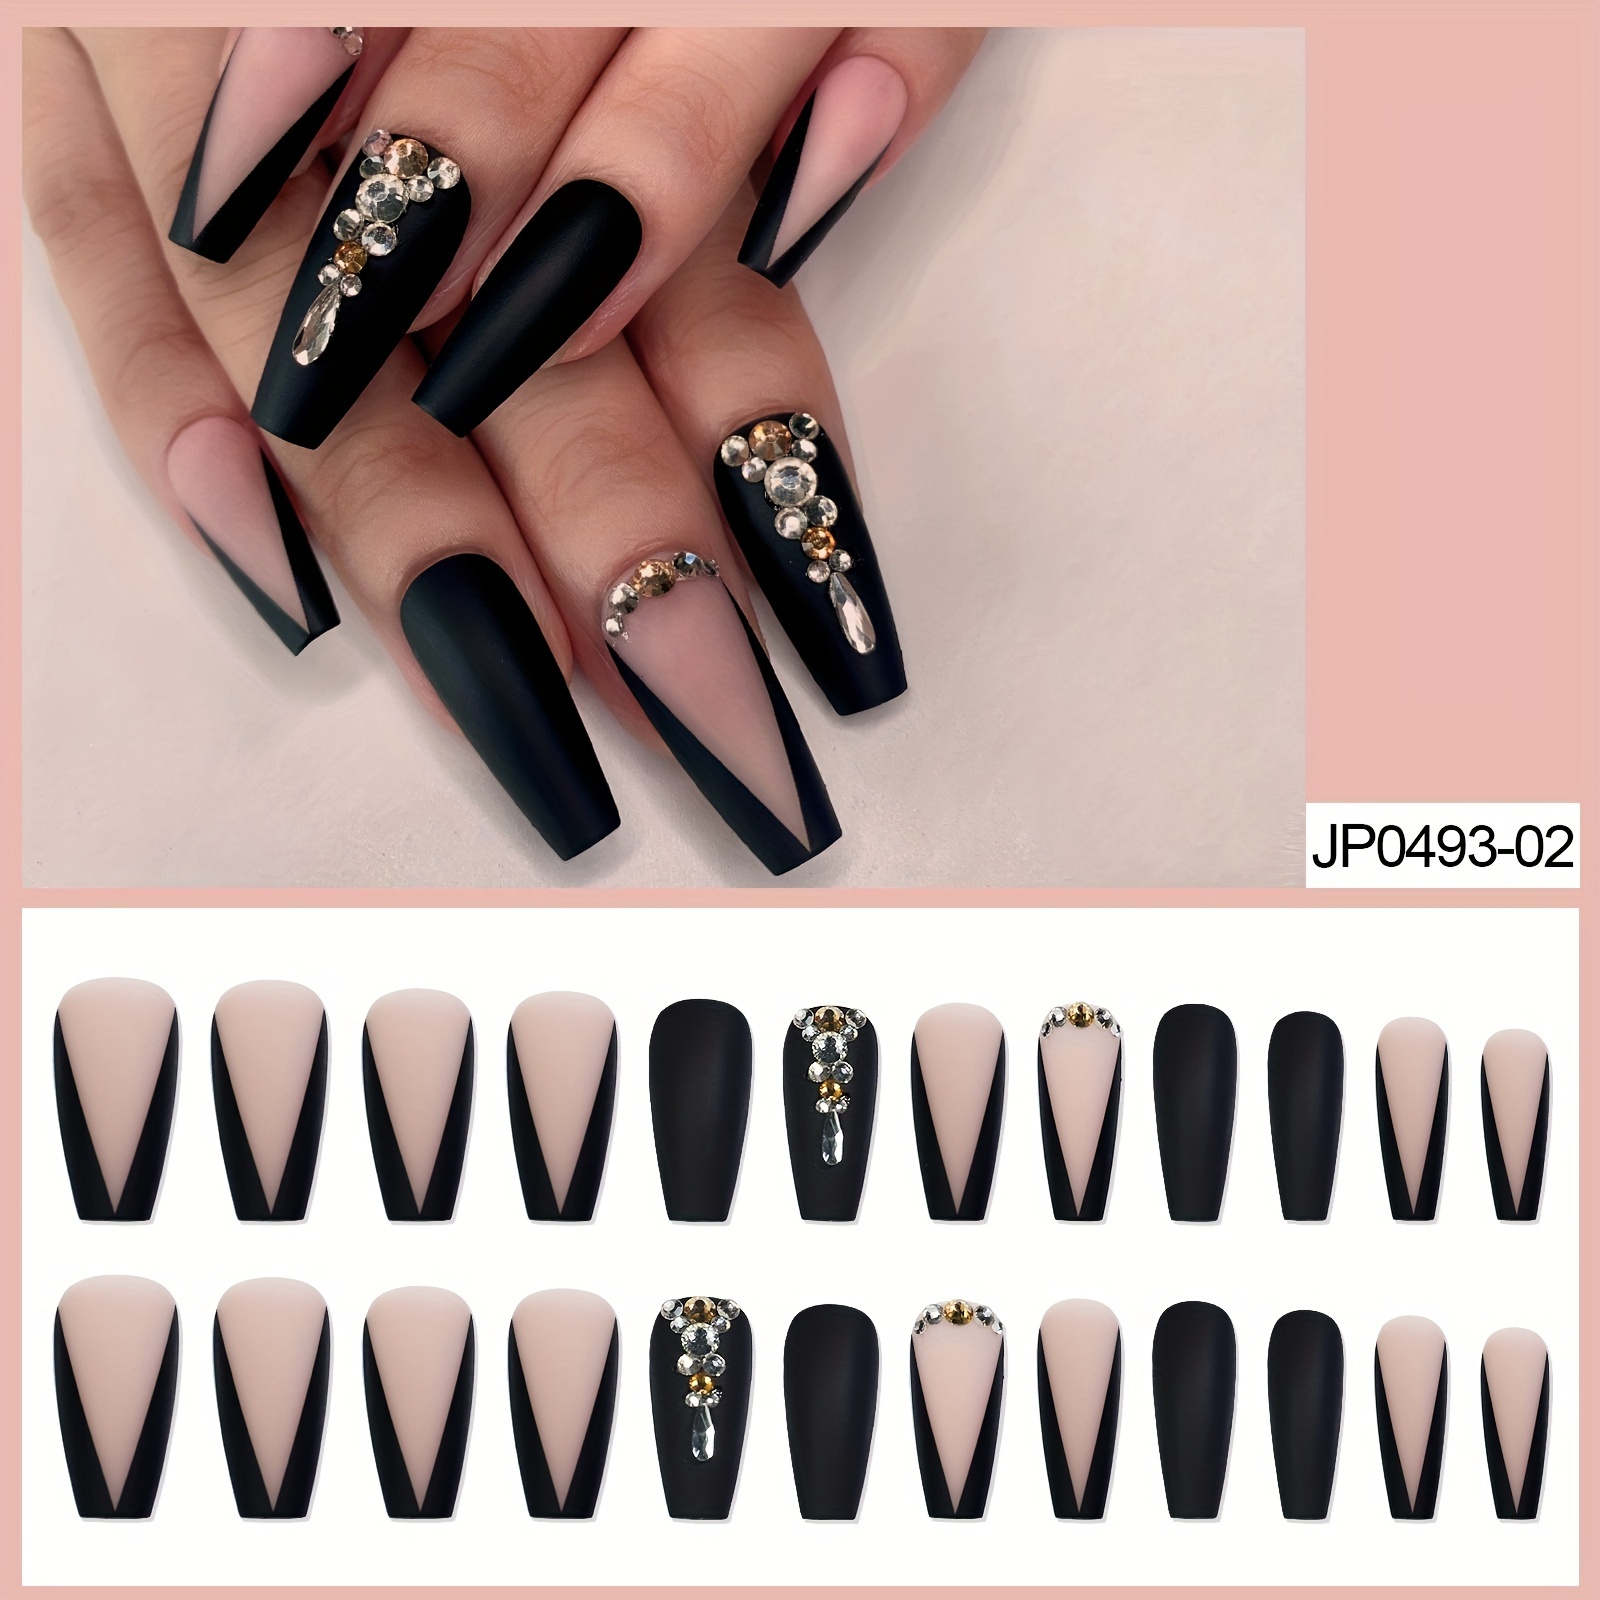 

24pcs Long Luxury Rhinestone Fake Nails Black French Tips Press On False Nails Natural Full Cover Coffin Artificial Fake Nails For Women Girls, Halloween Nails